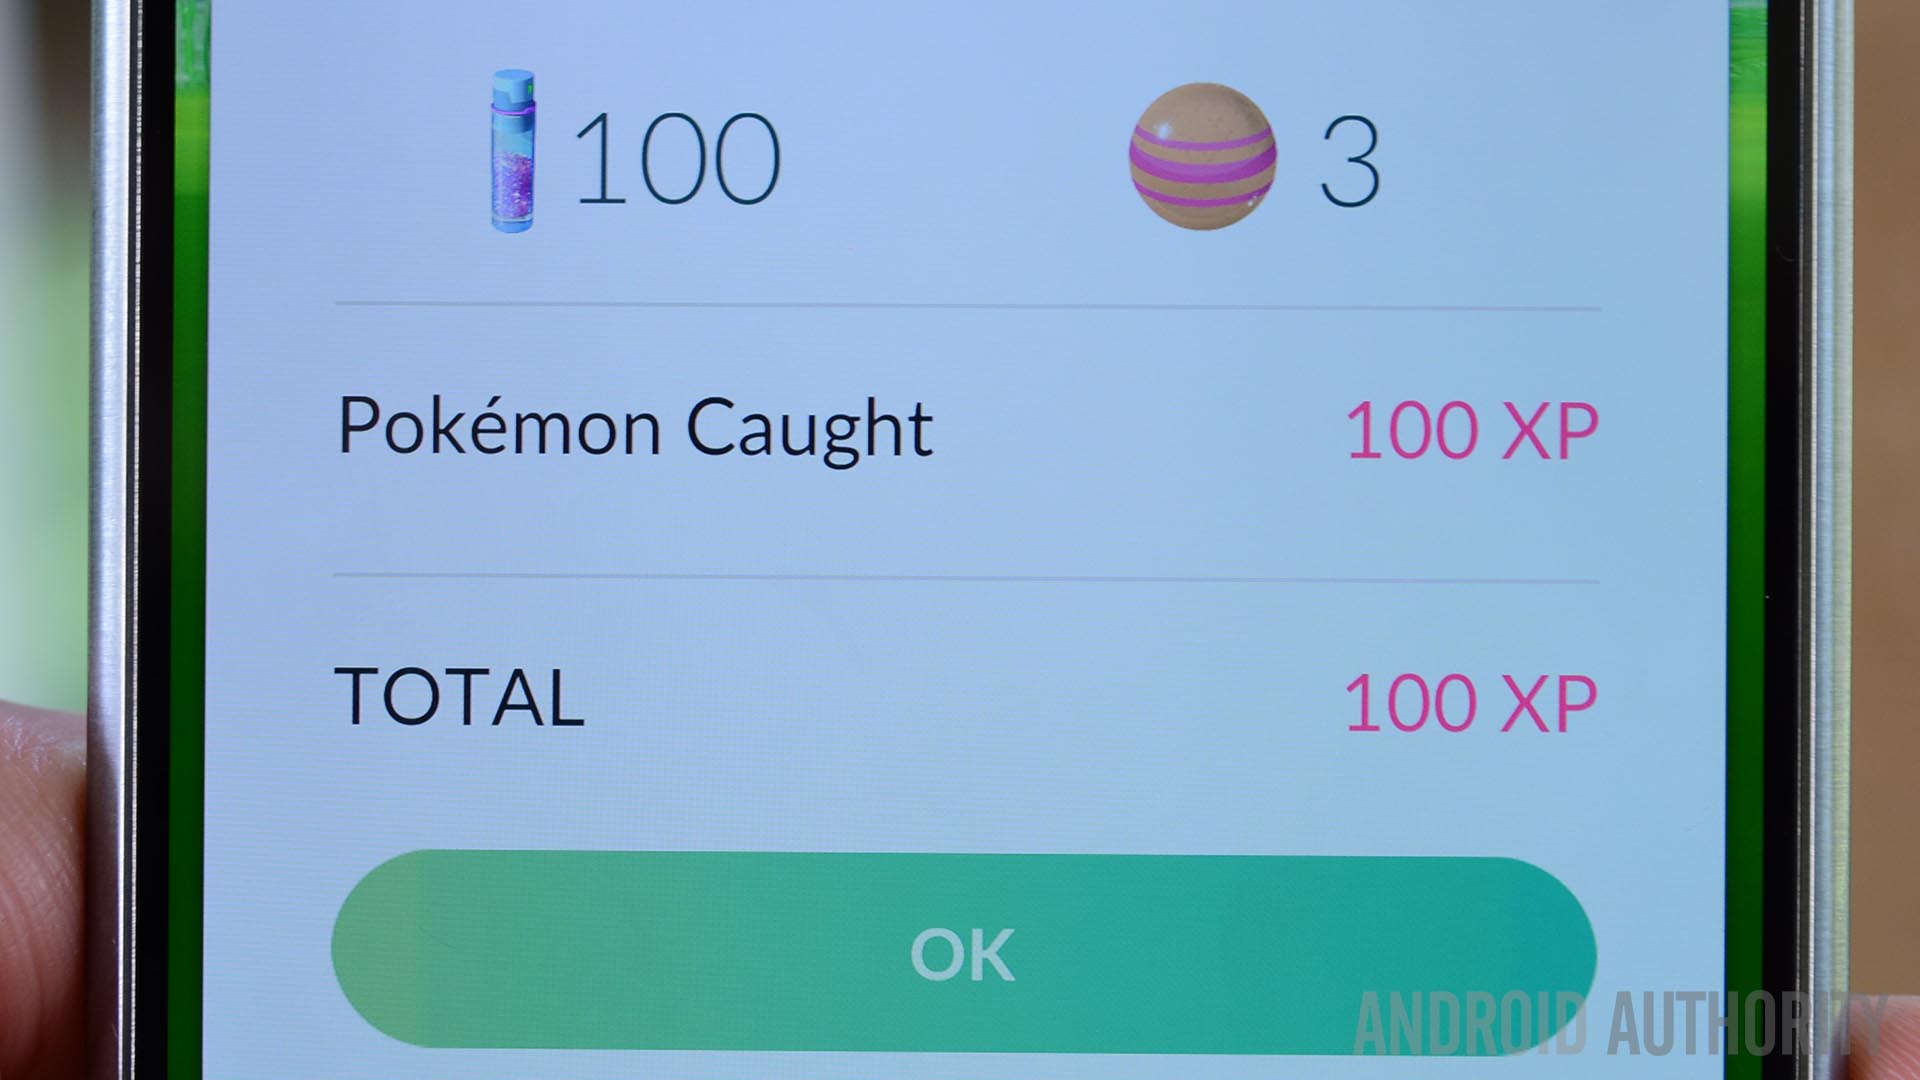 How To Gain Xp And Level Up Faster In Pokemon Go Android Authority